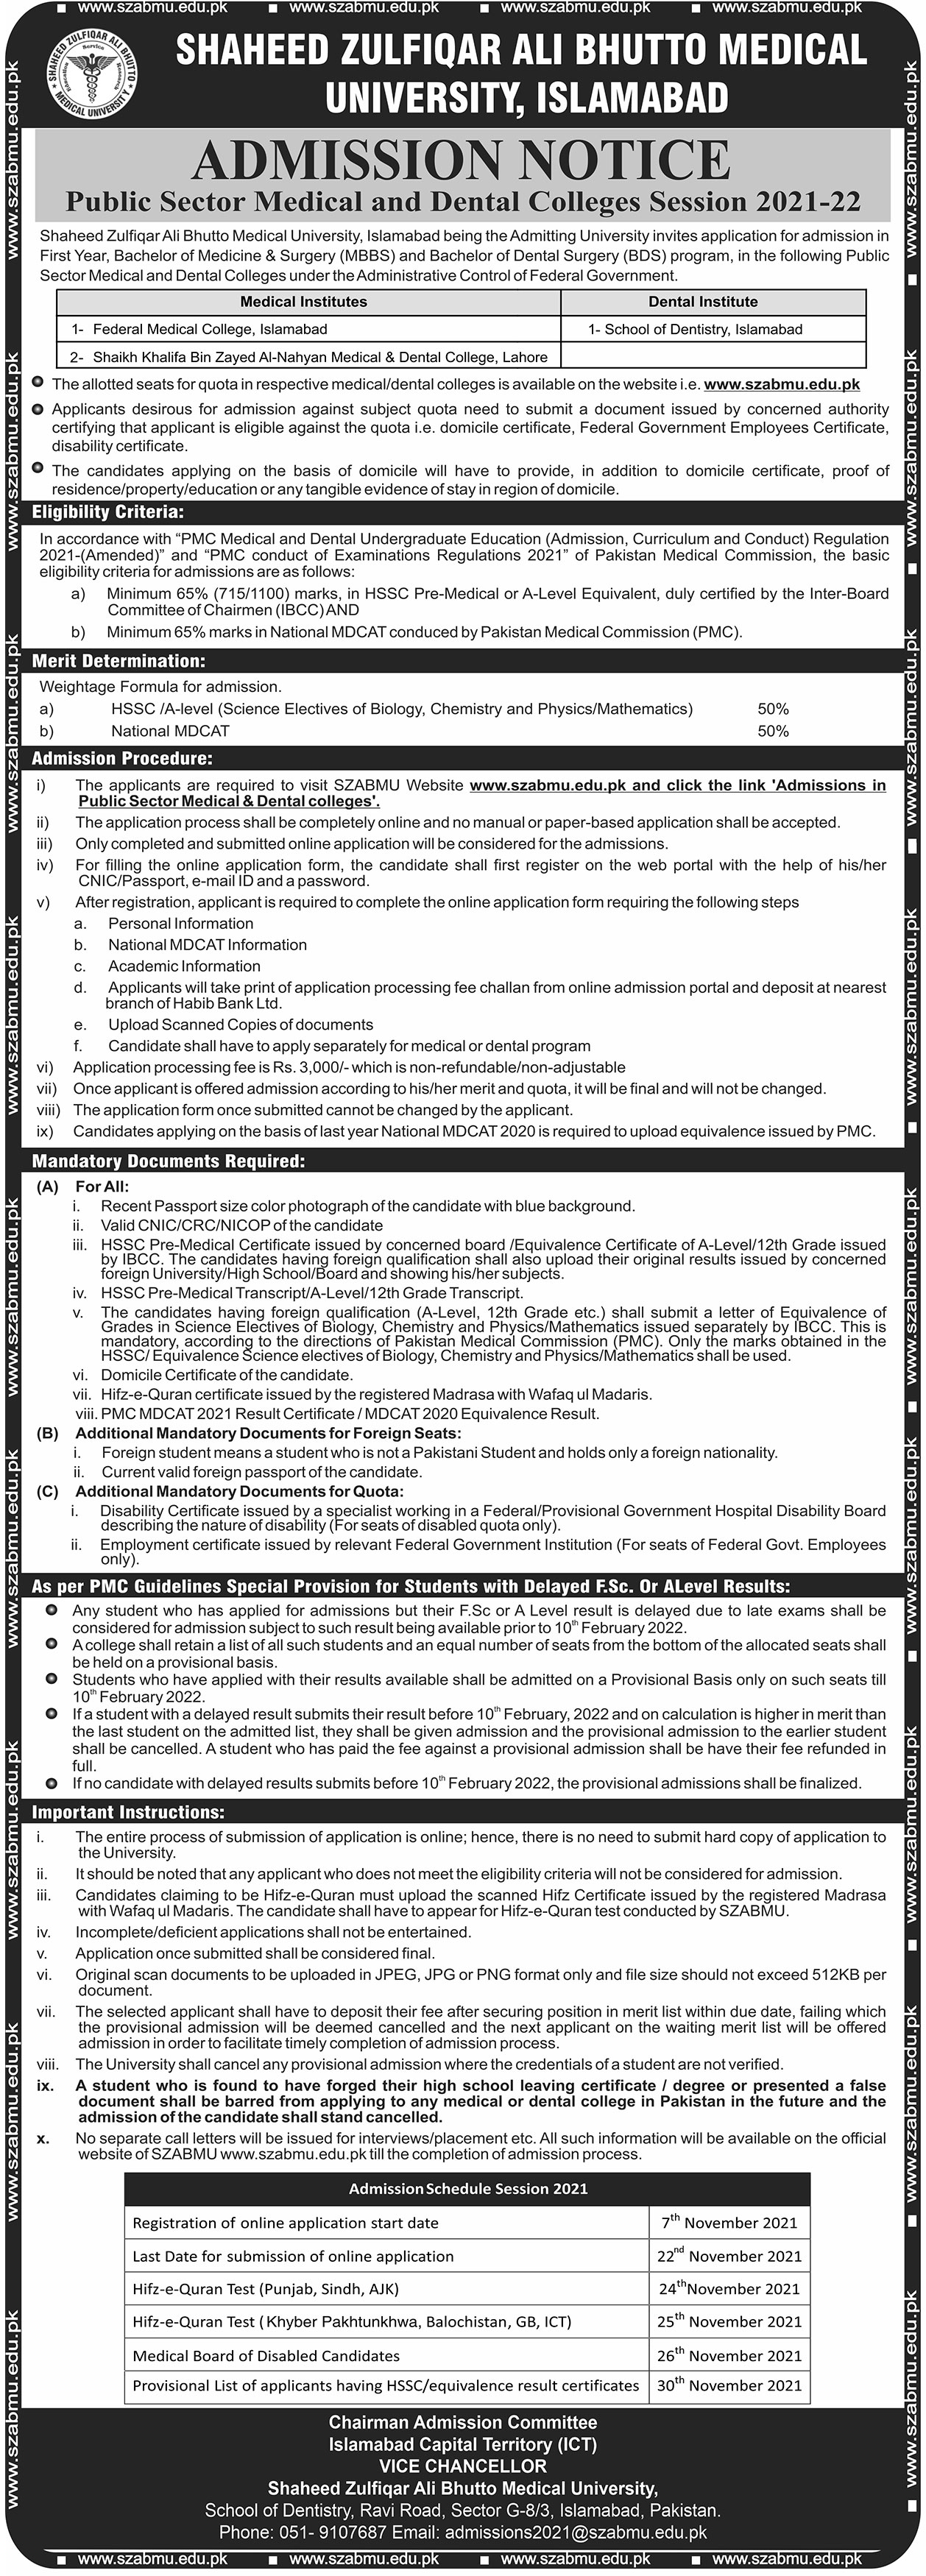 ADMISSION NOTICE - Public Sector Medical and Dental Colleges Session 2021-22